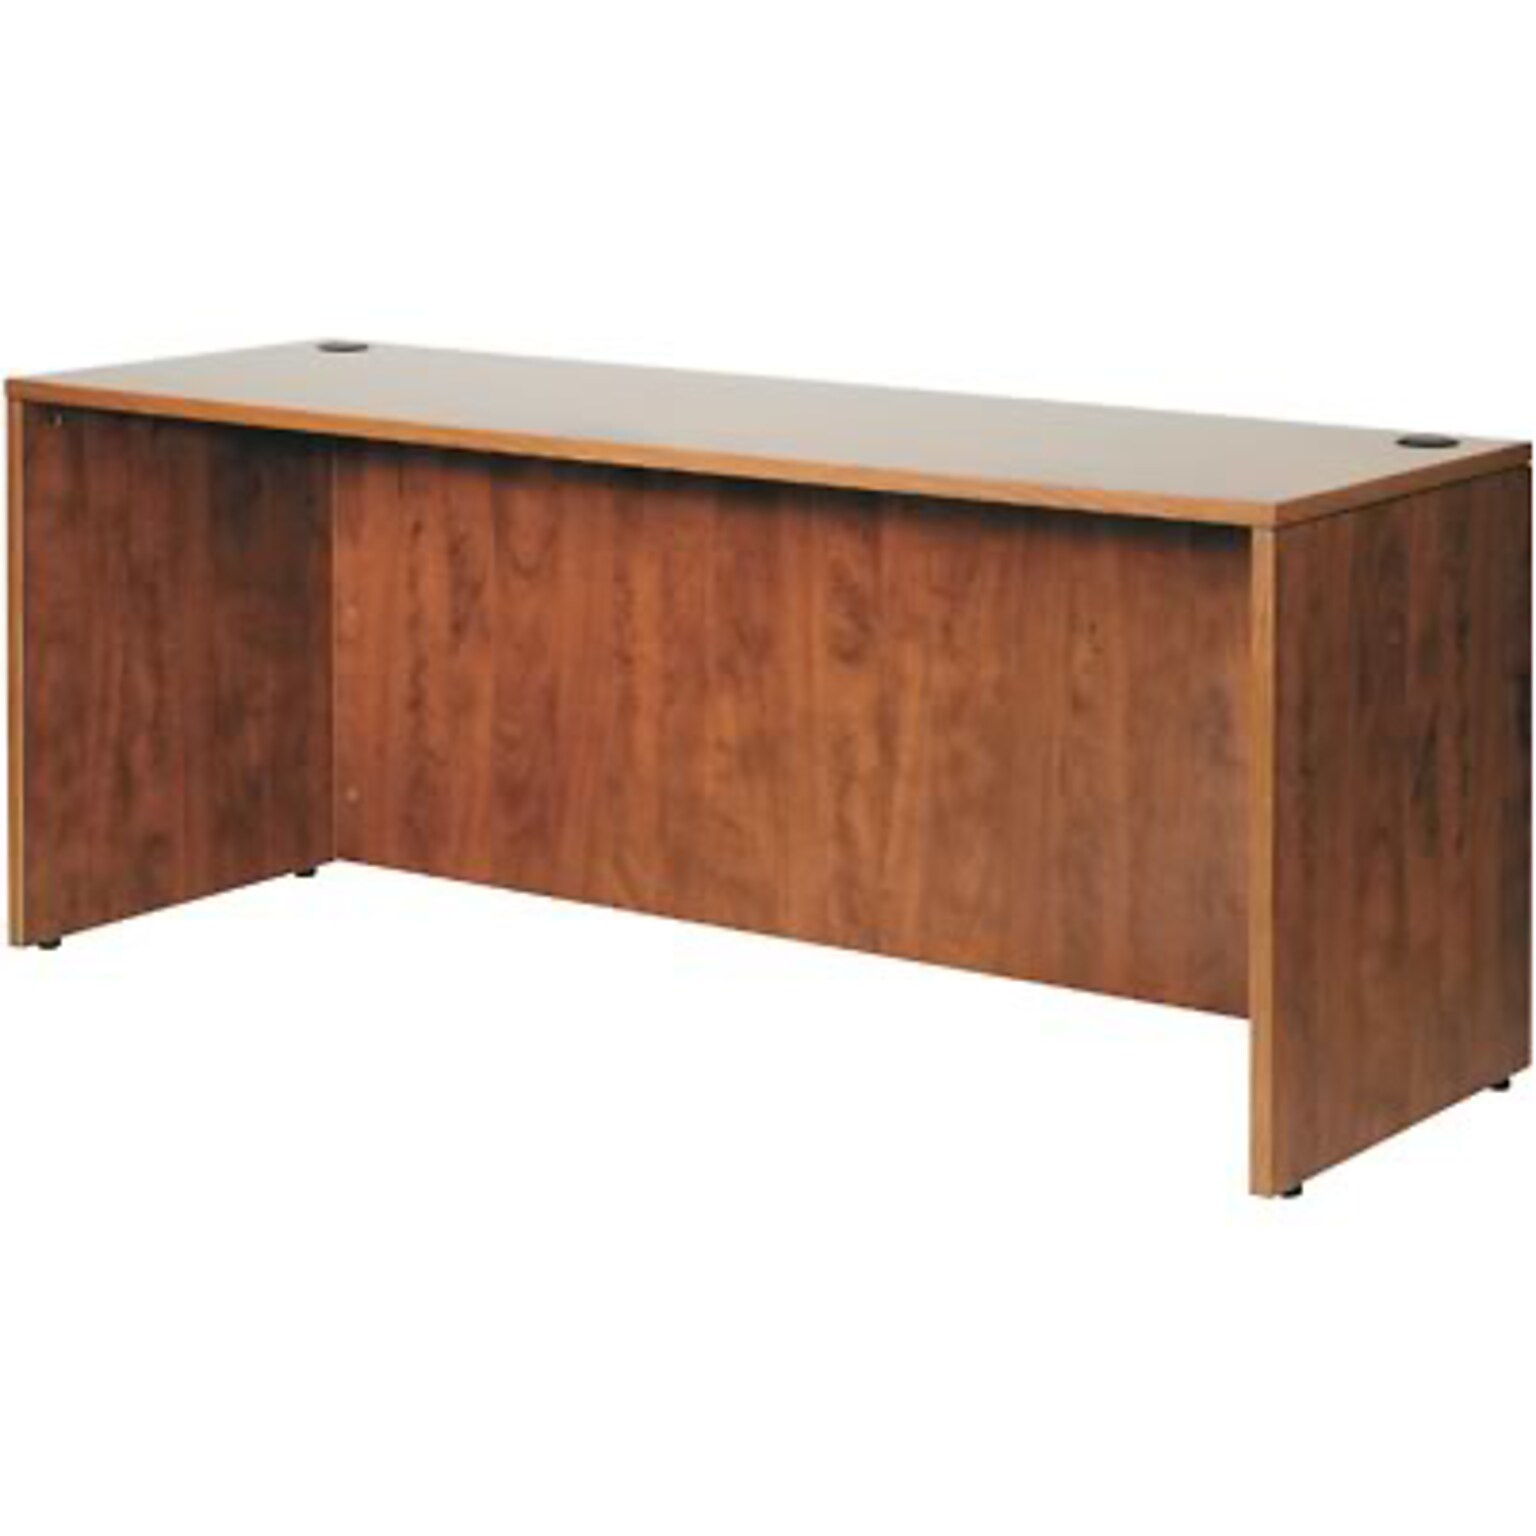 Boss® Laminate Collection in Cherry Finish; Credenza Shell